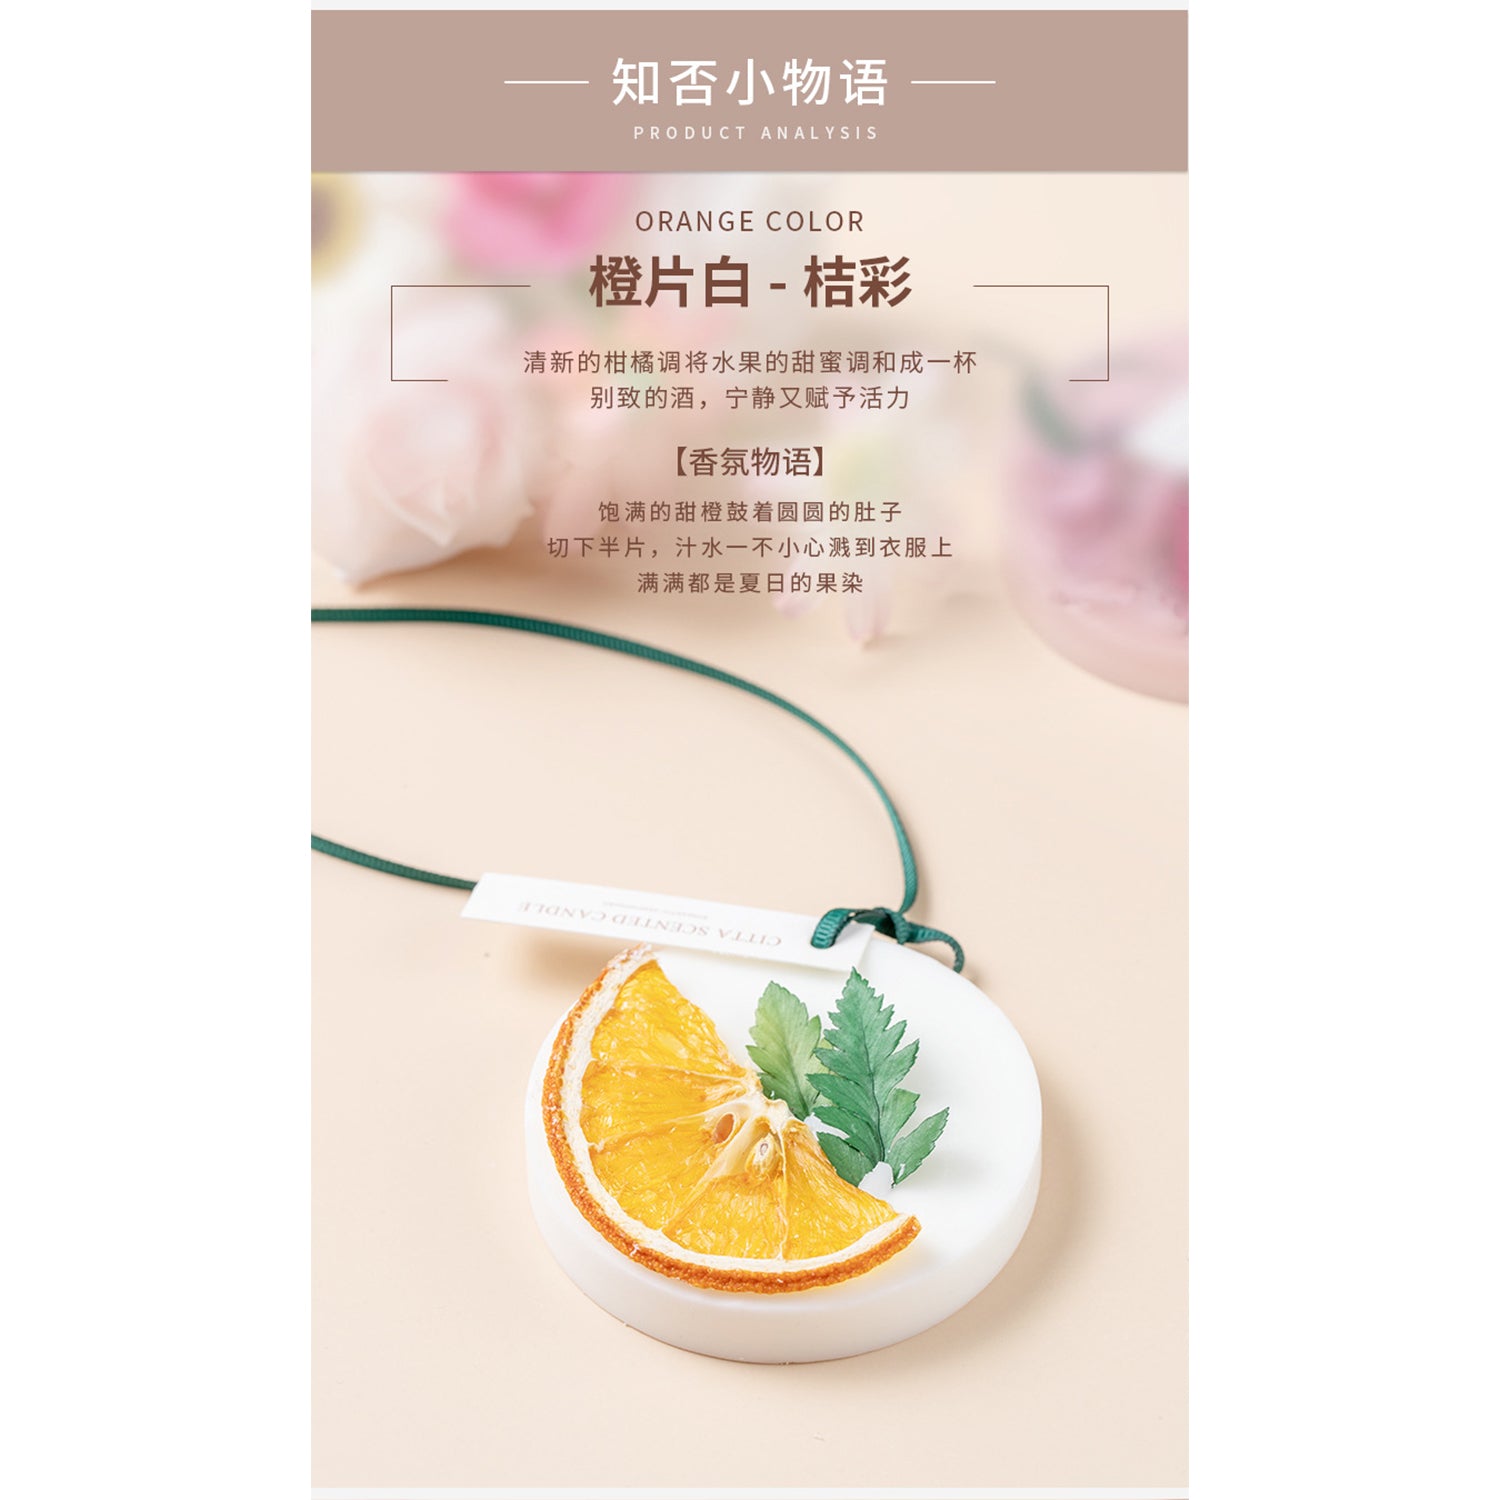 CITTA Dried Flower Scented Wax Slice Door Gift Aromatherapy Natural Smell Aroma Candle Natural Smell Wardrobe Perfume Fragrance Aromantic Closet Scent/ Sachet Fragrance